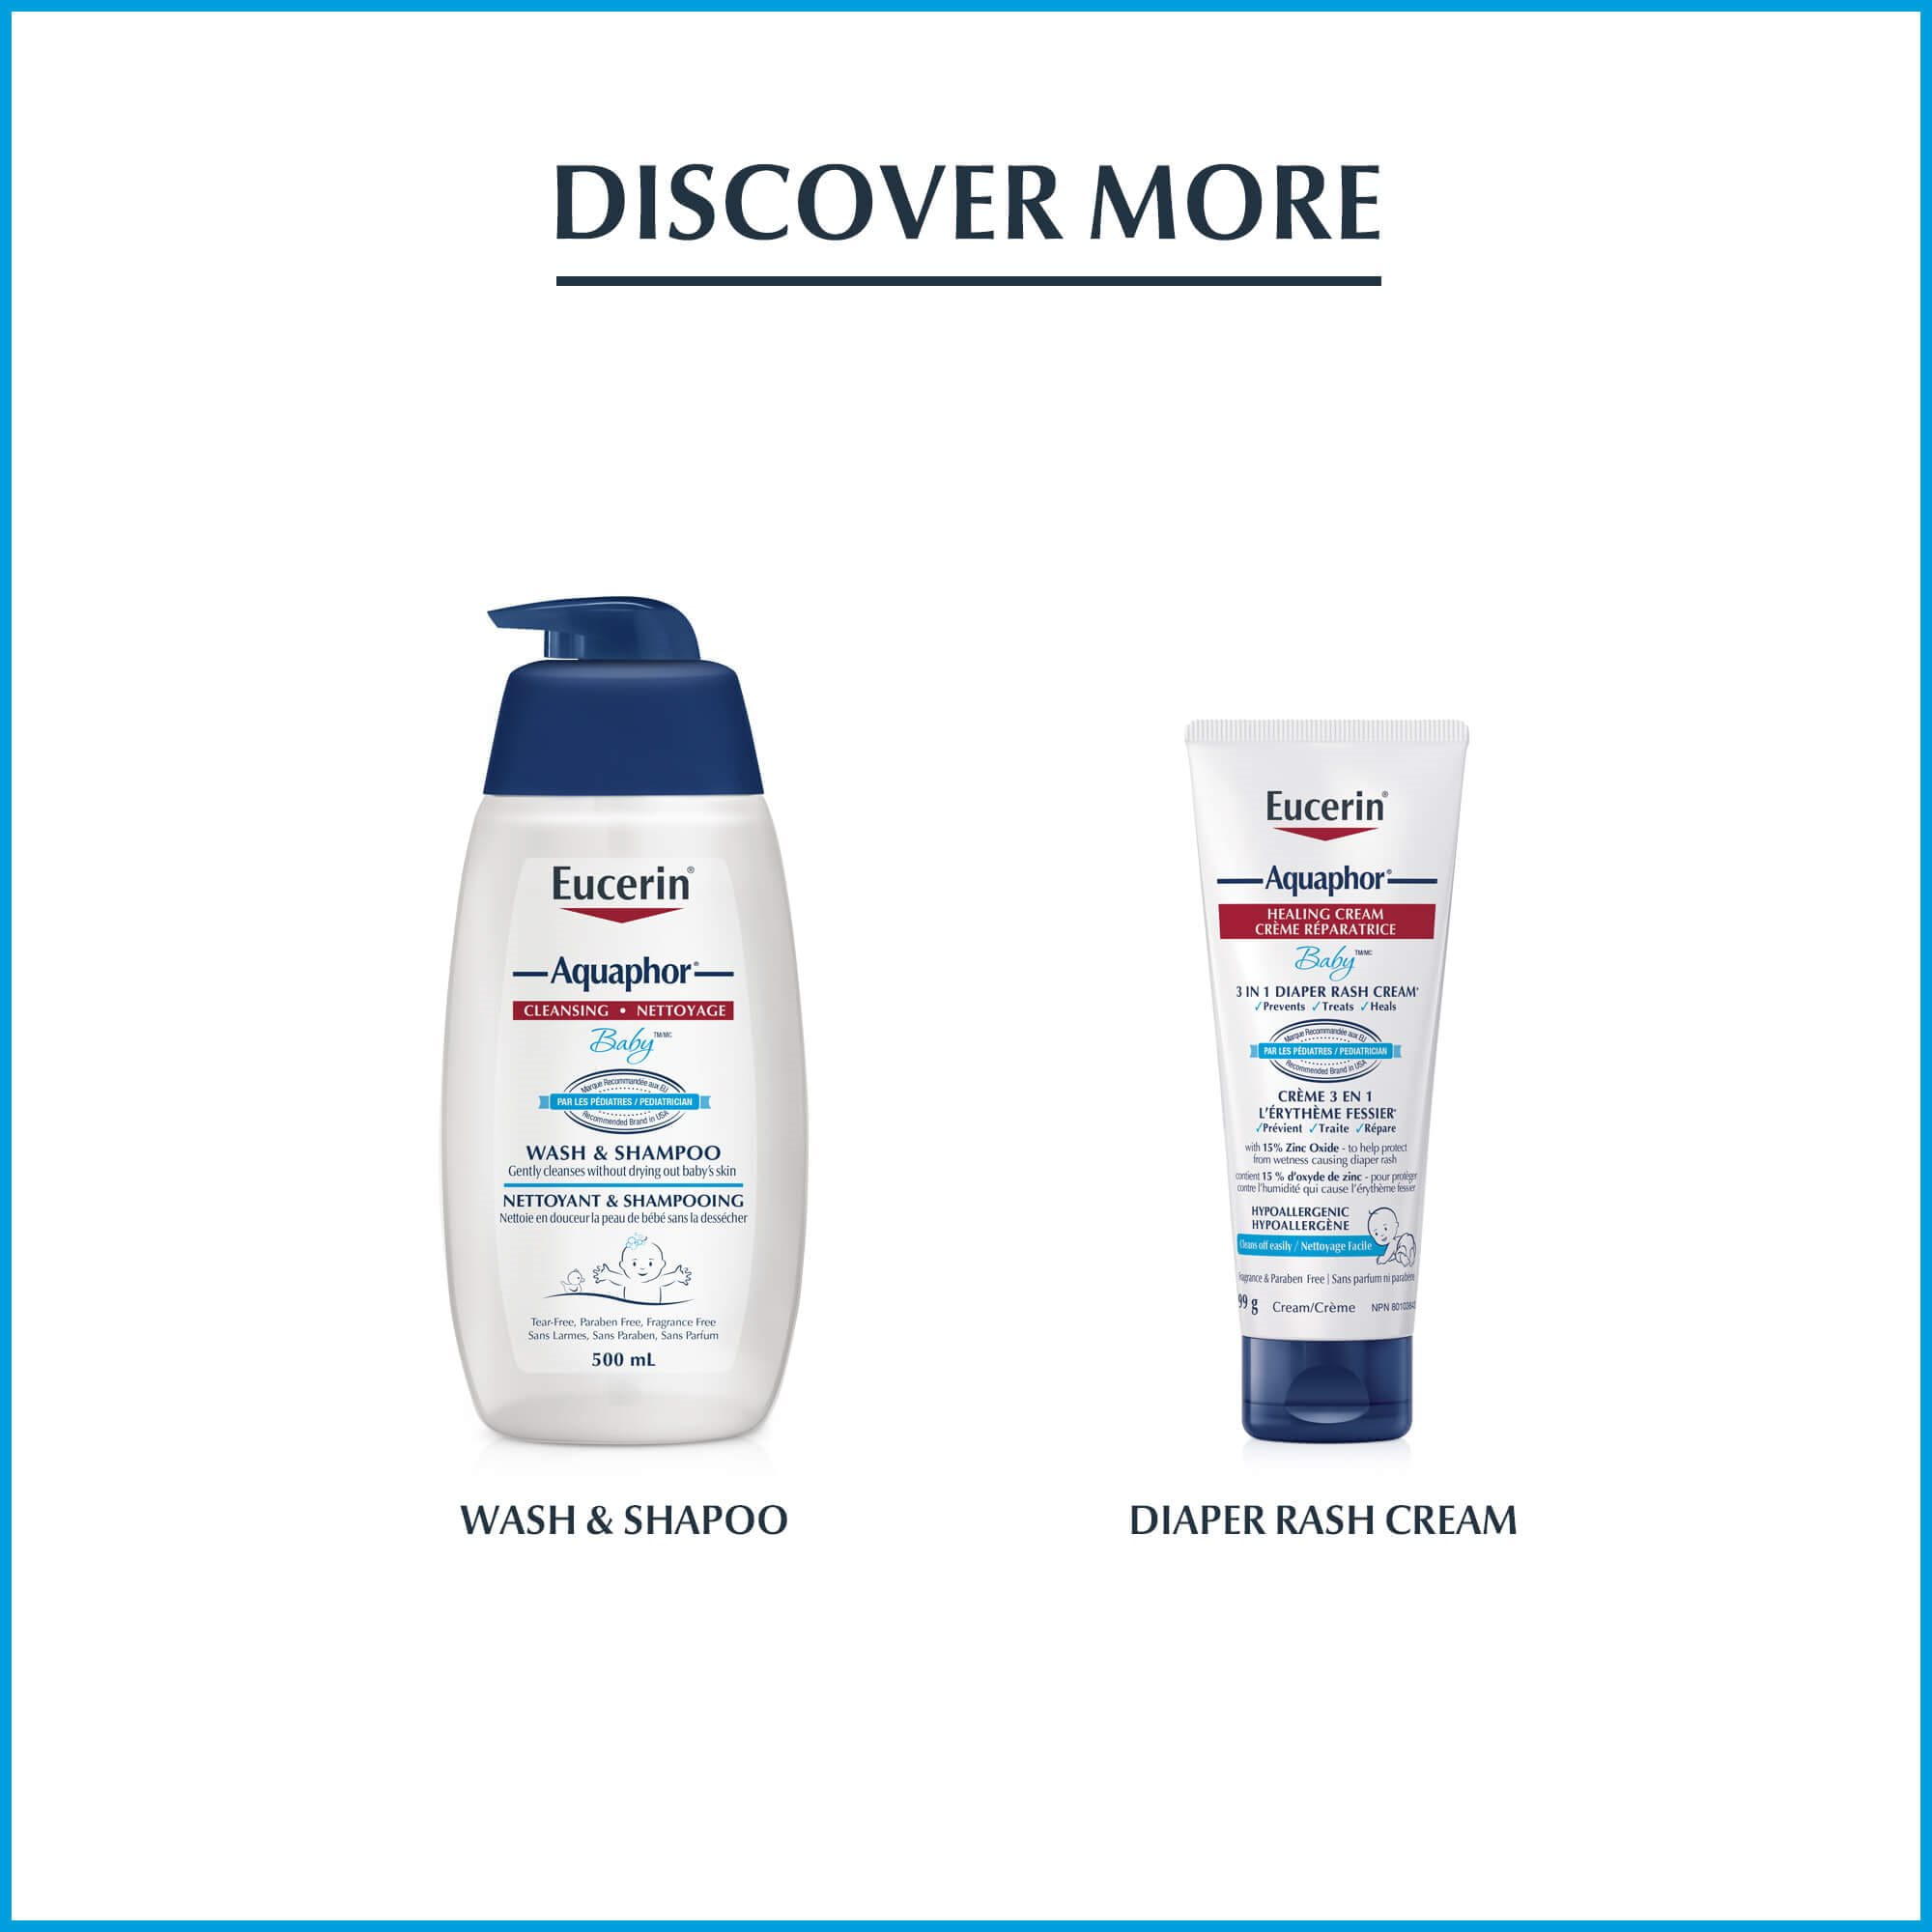 View of Eucerin Aquaphor Baby Wash and Shampoo size 500 mL product and Eucerin Aquaphor healing cream size 99g against a white background.